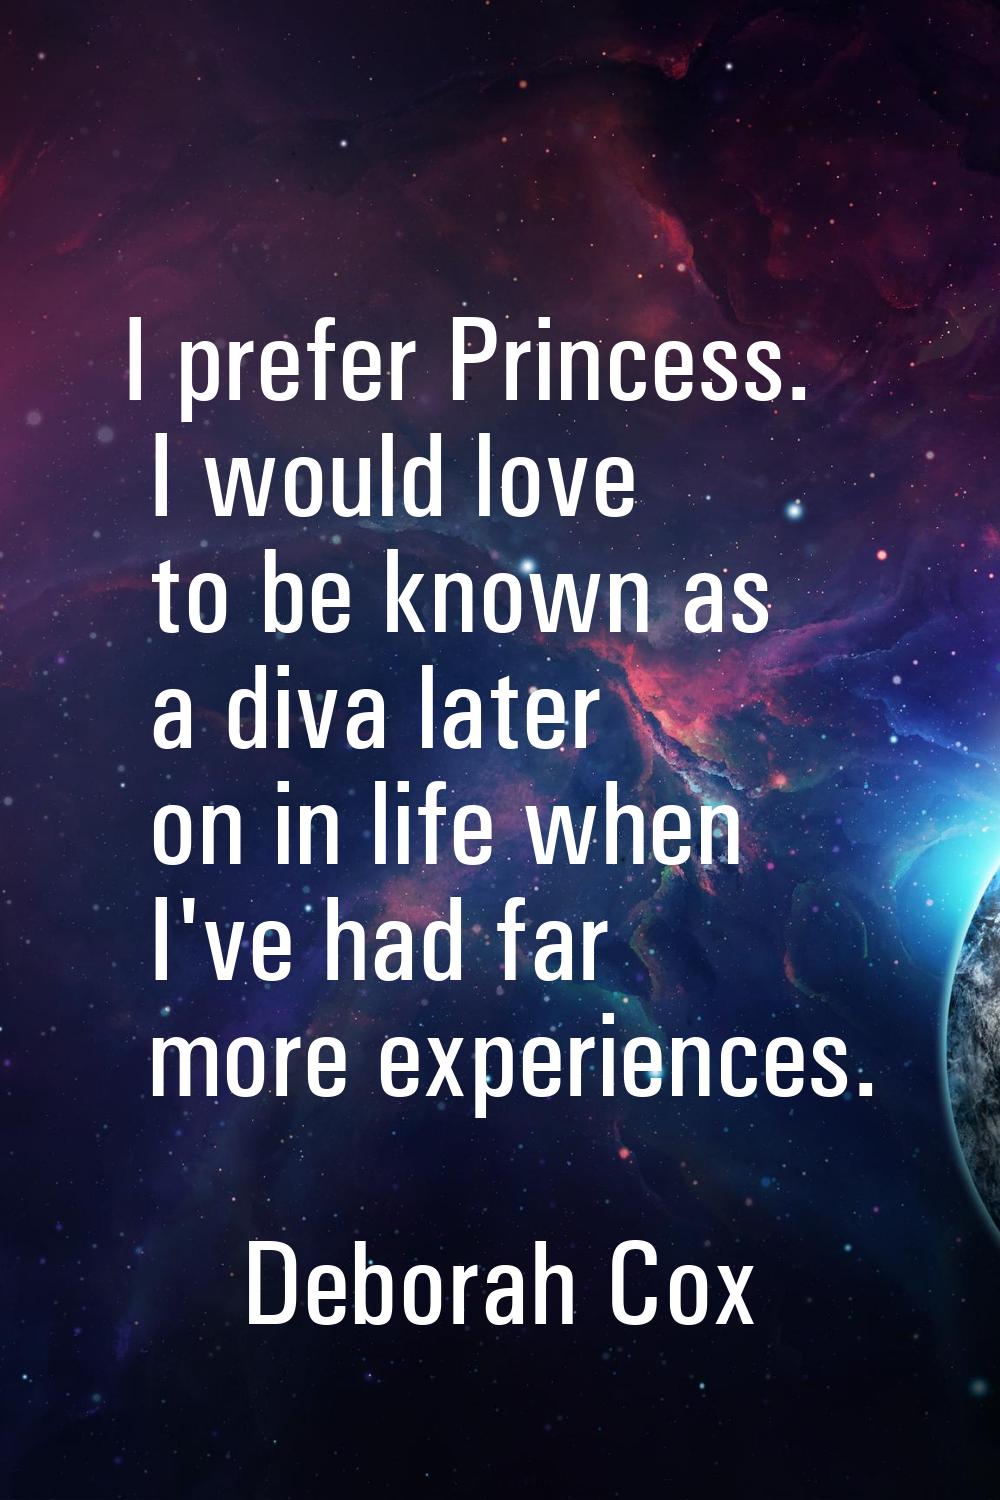 I prefer Princess. I would love to be known as a diva later on in life when I've had far more exper